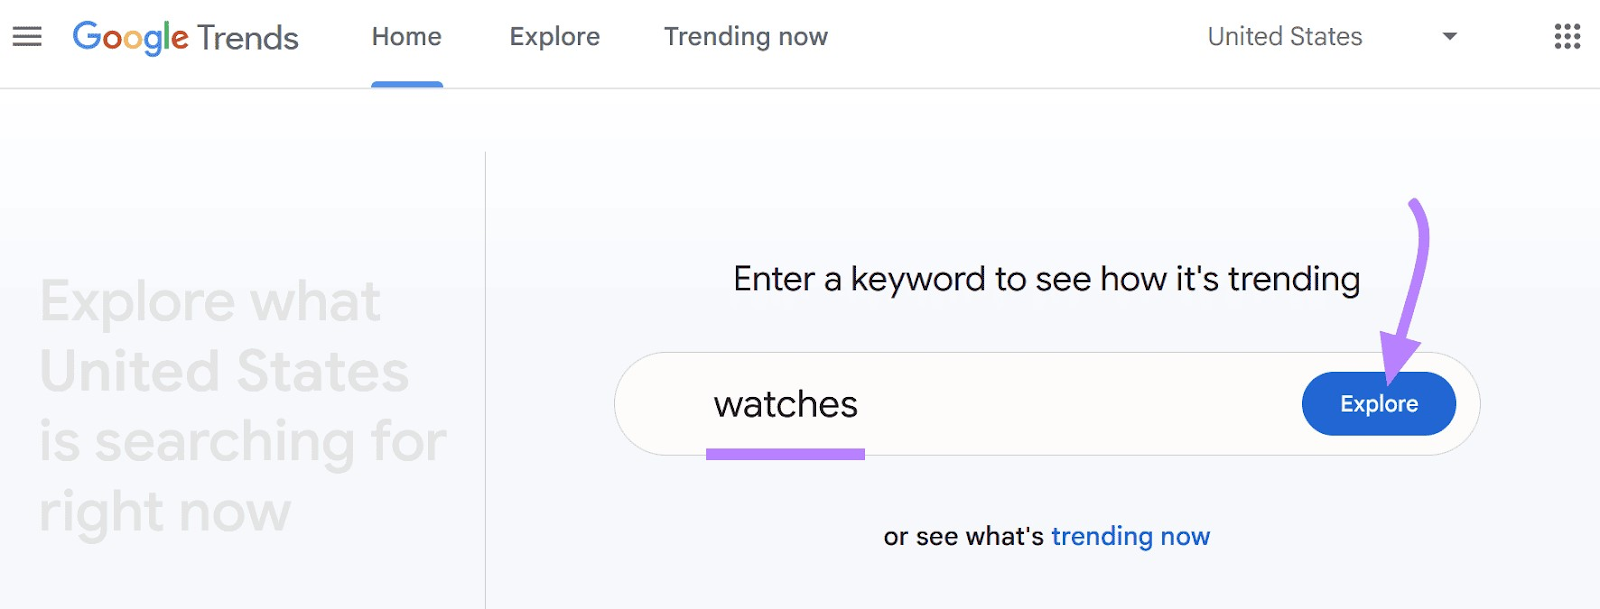 "watches" entered into the Google Trends search bar